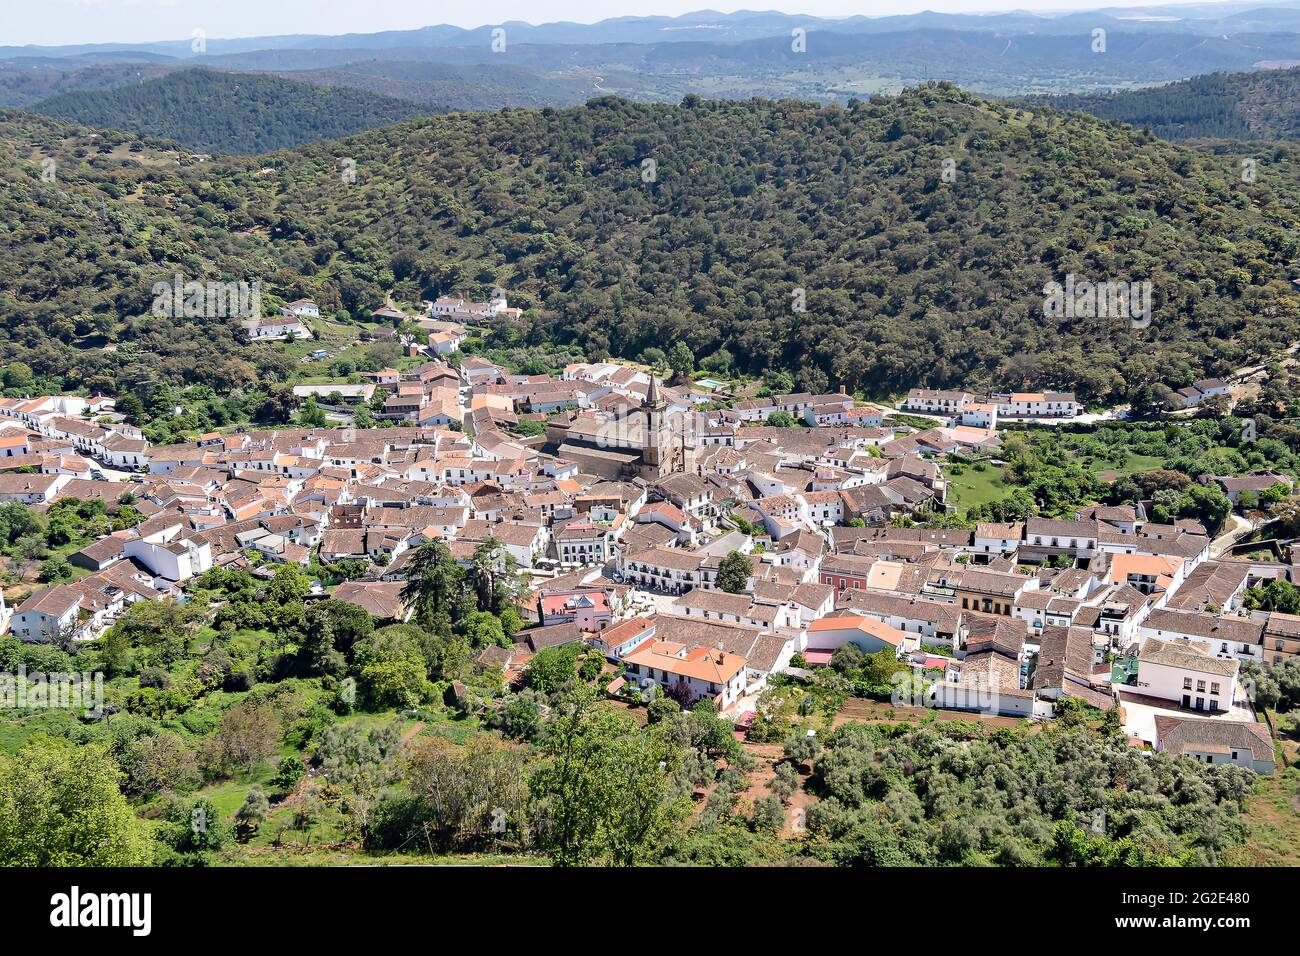 Alajar, municipality in the Sierra de Aracena, province of Huelva, Andalusia. It gives its name to the highest mountain pass in the province of Huelva Stock Photo